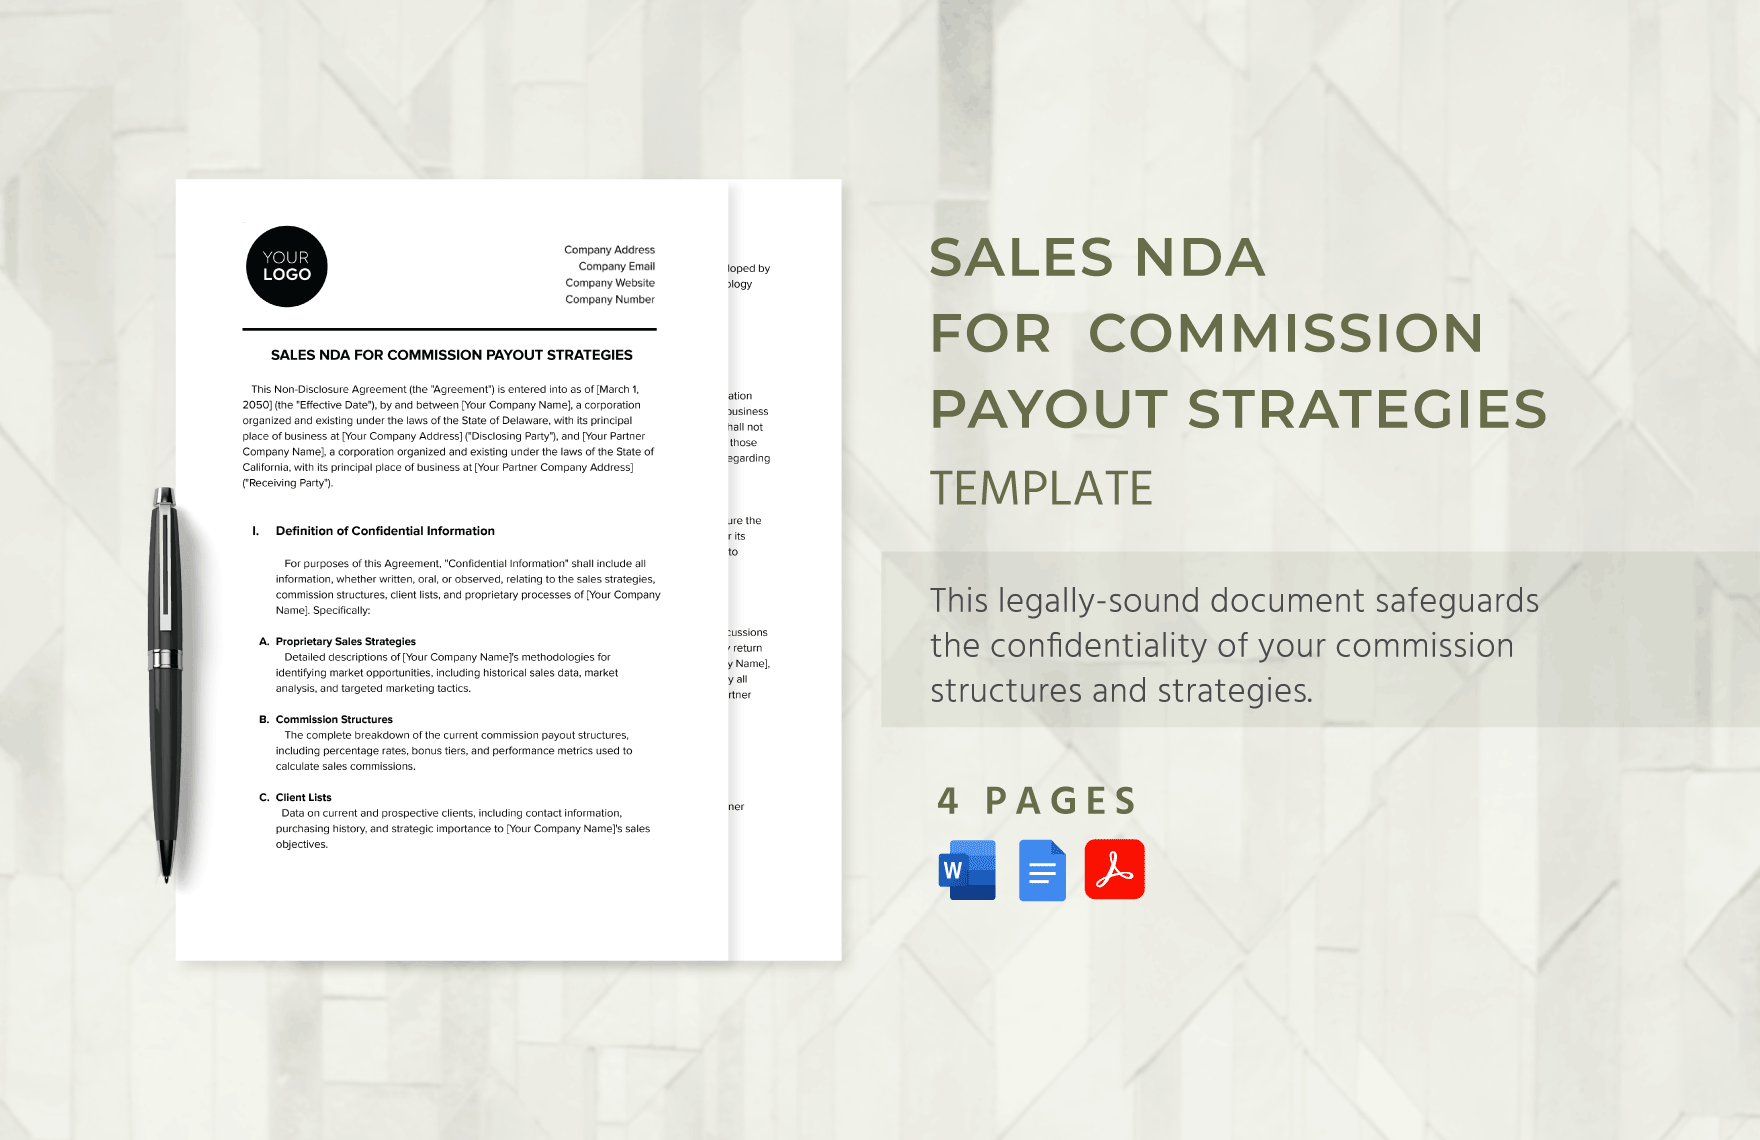 Sales NDA for Commission Payout Strategies Template